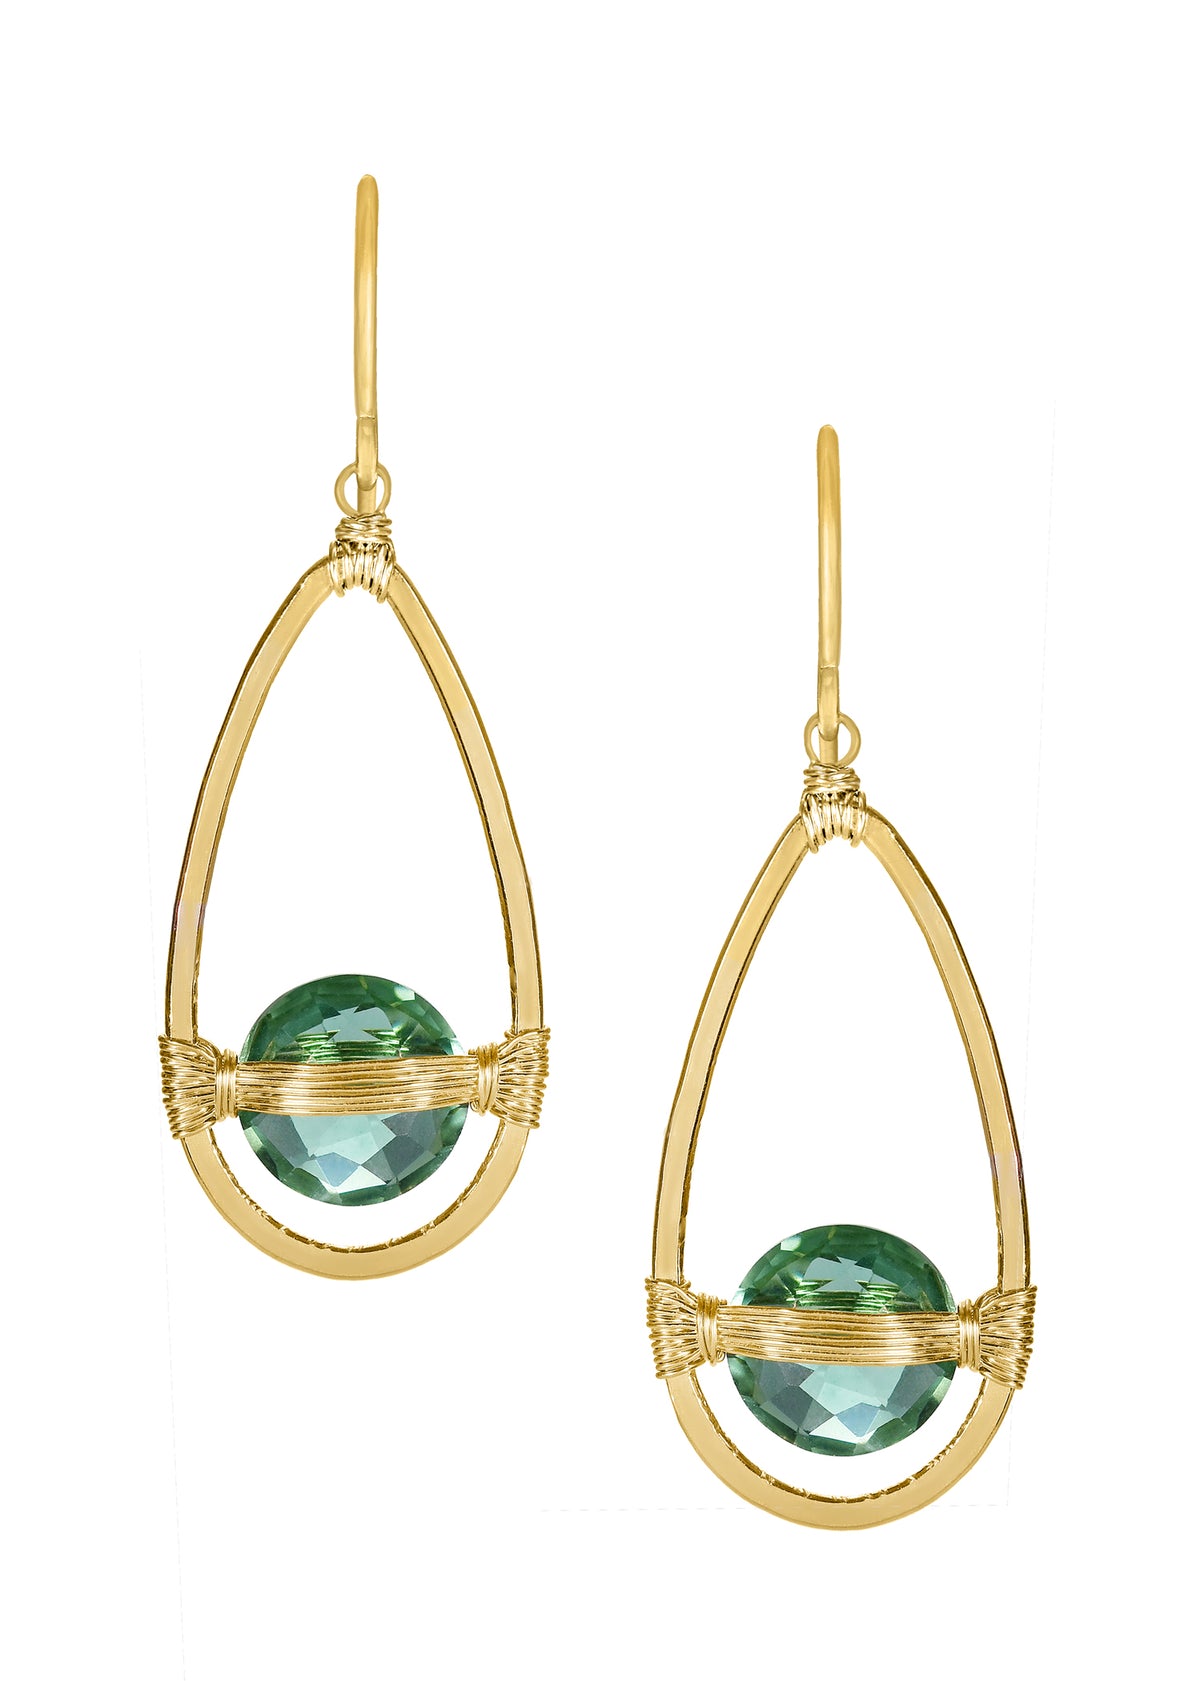 Green quartz 14k gold fill Earrings measure 1-1/2&quot; in length (including the ear wires) and 1/2&quot; in width at the widest point Handmade in our Los Angeles studio